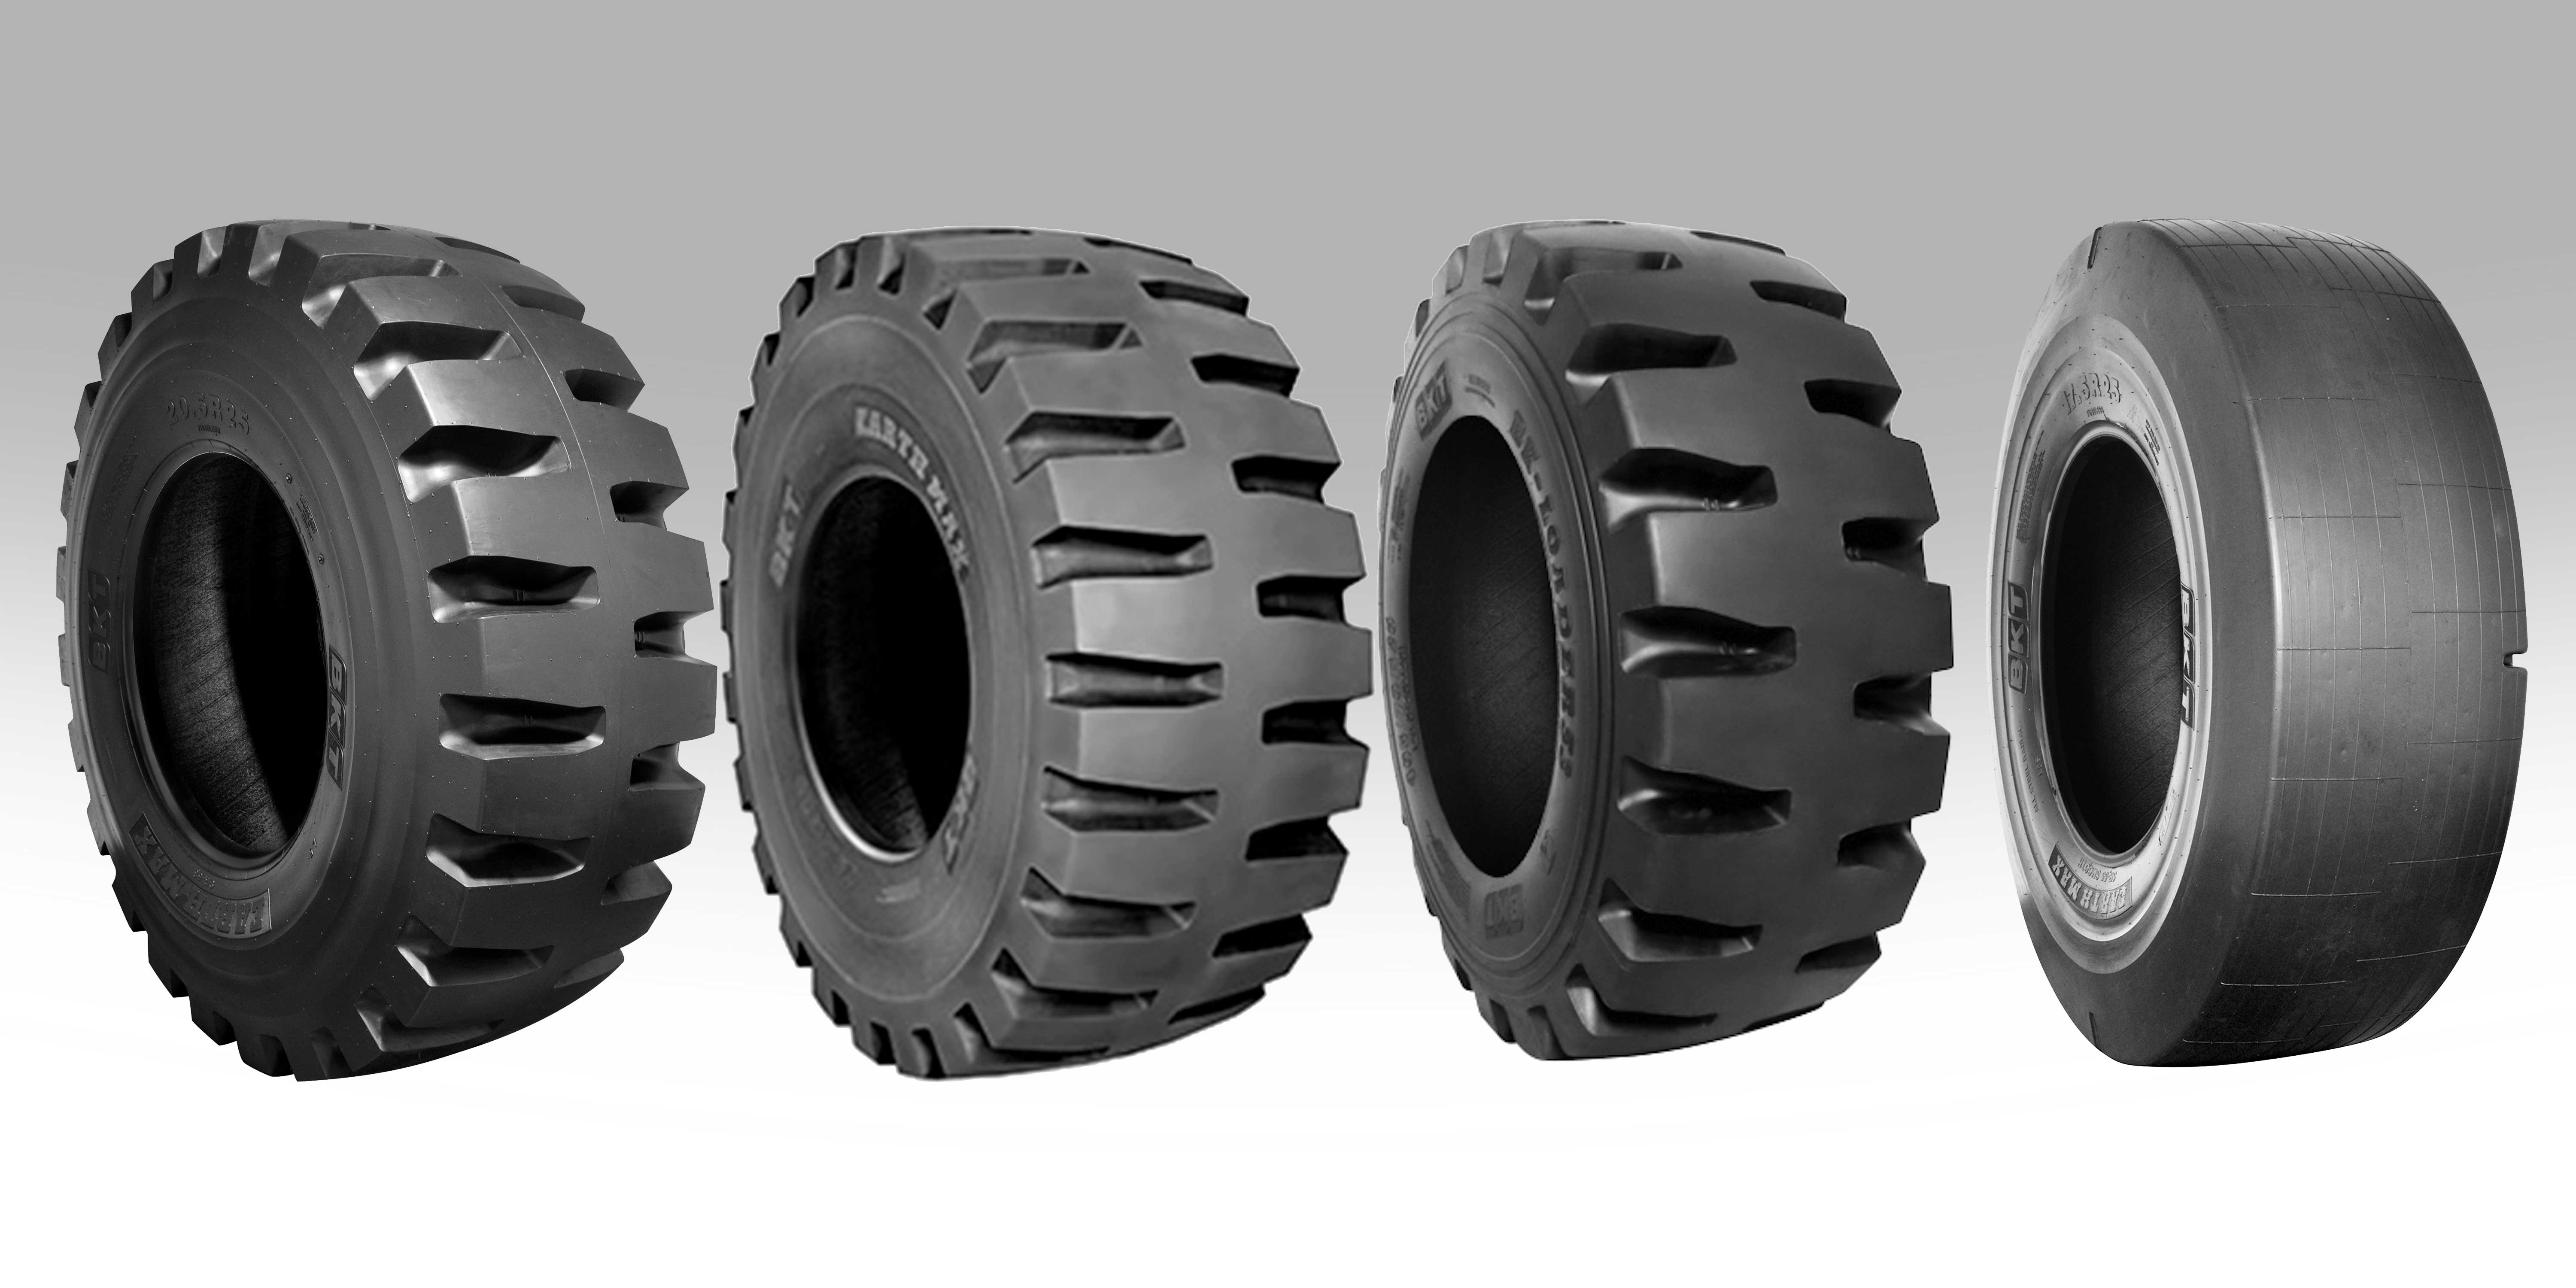 BKT Develops Four Tires for Recycling Operations